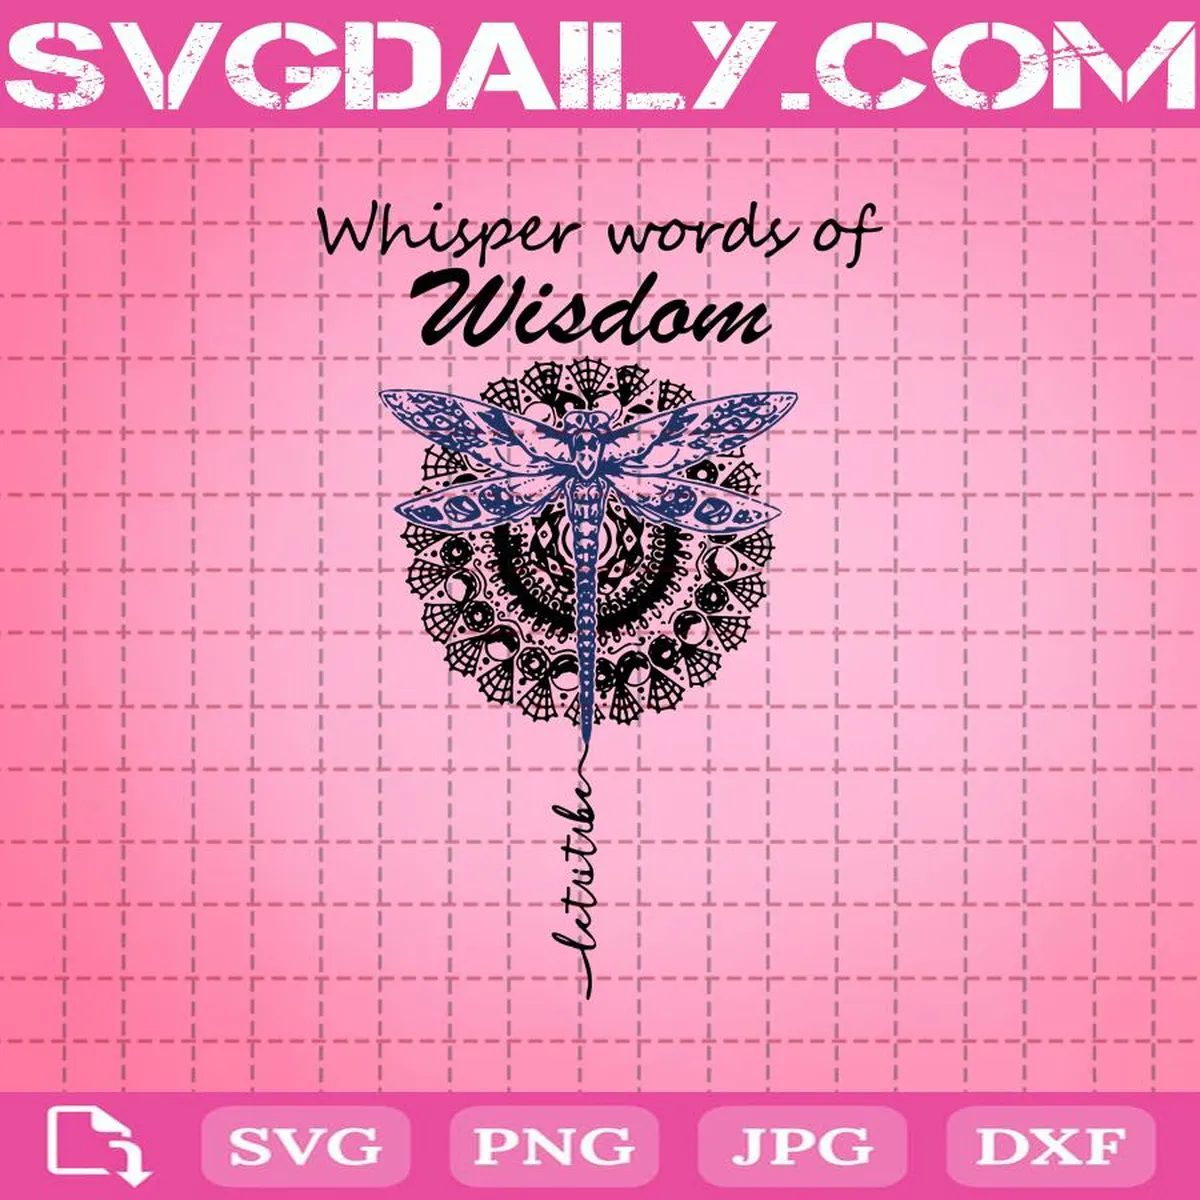 Dragonfly Whisper Words Of Wisdom Let It Be Svg, Hippie Svg, Gypsy Svg, Let It Be Svg